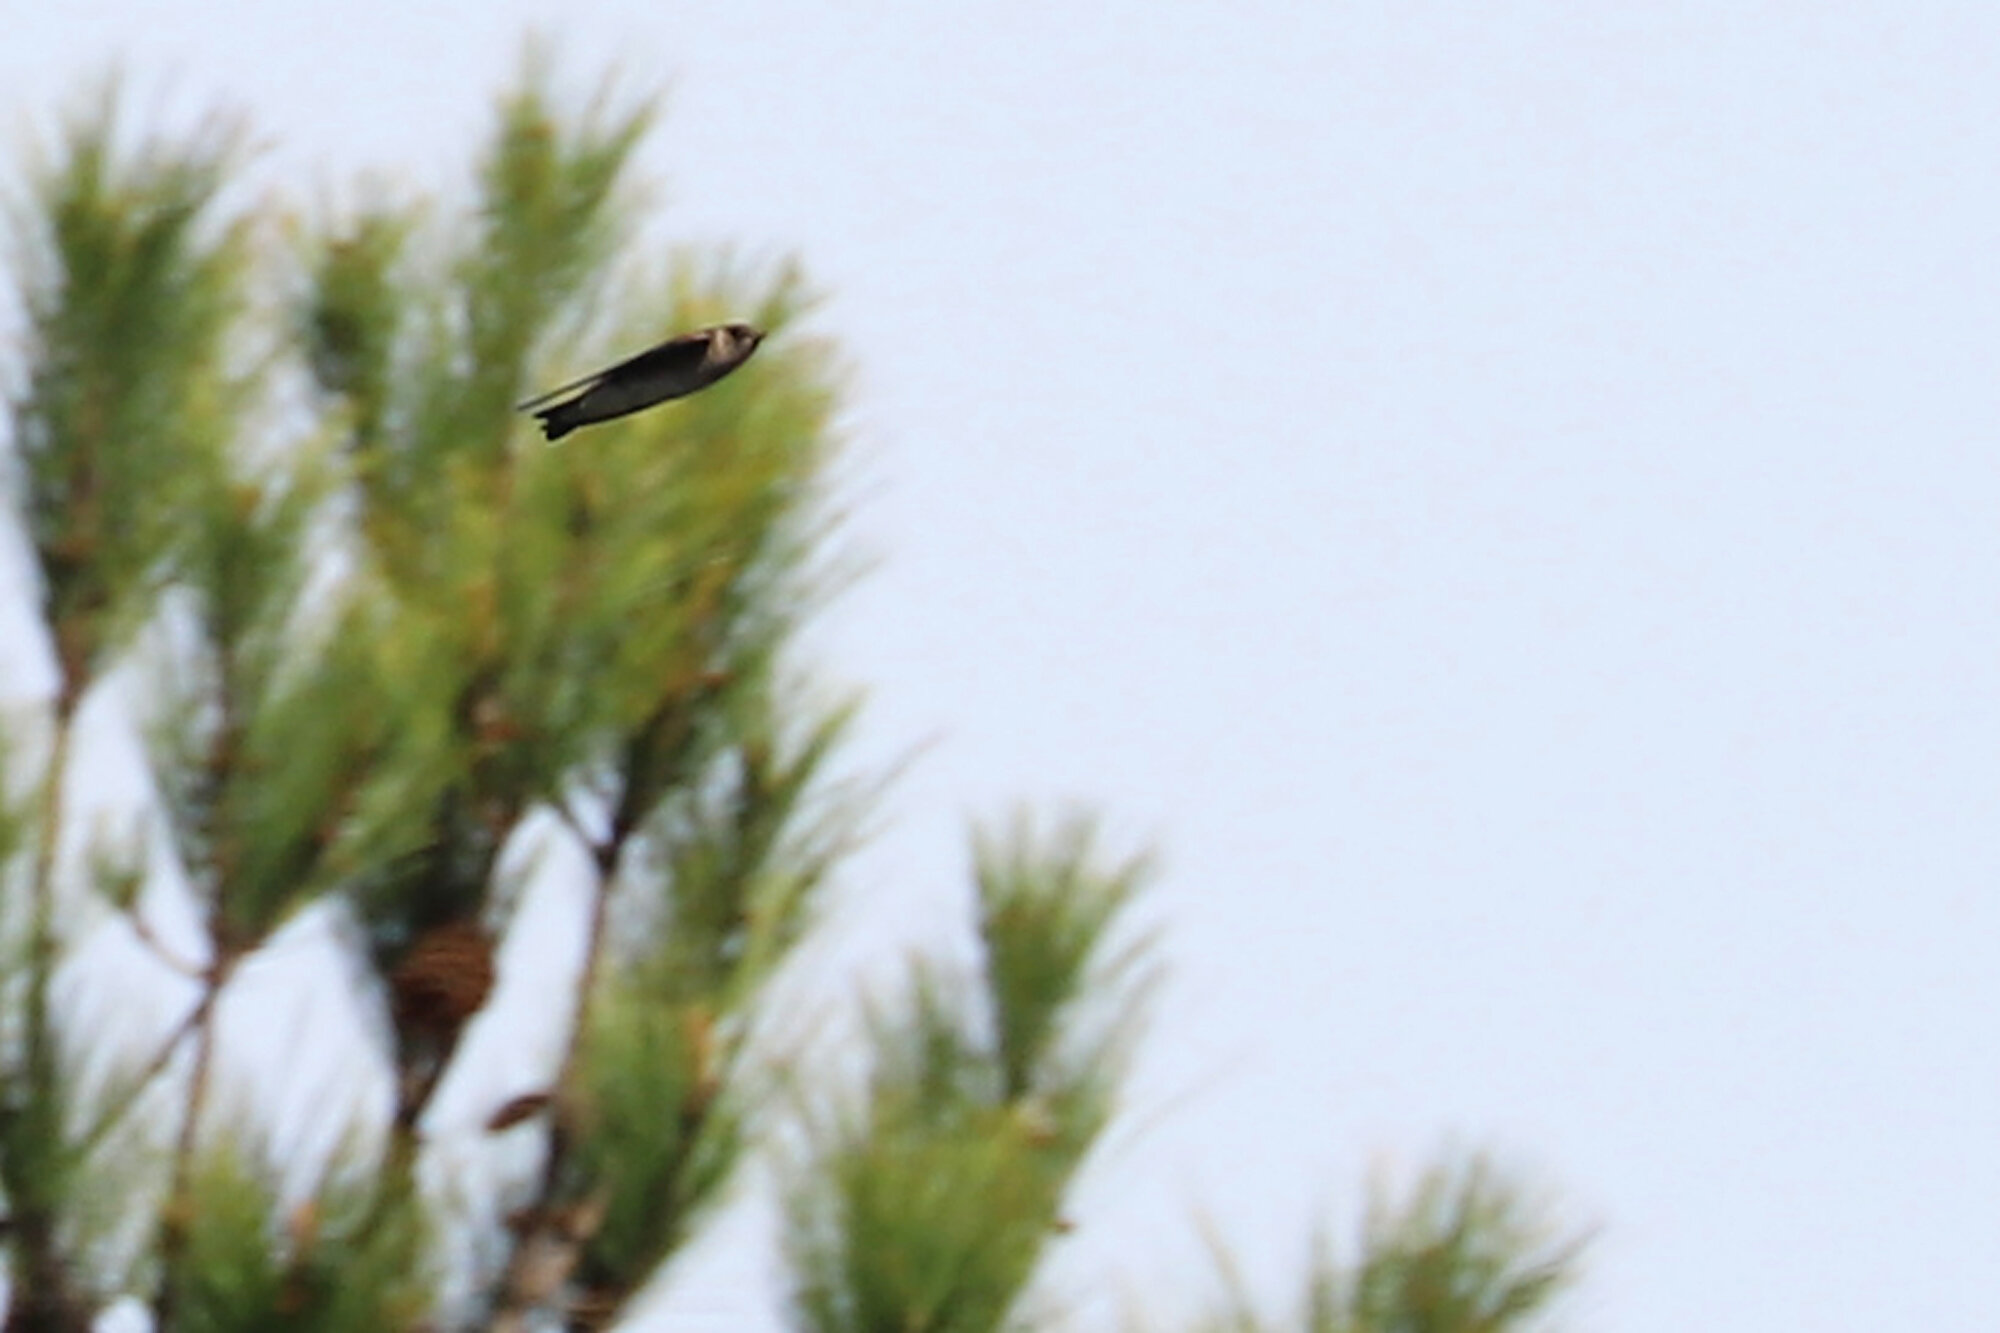  Northern Rough-winged Swallow / NAS Oceana (Restricted) / 14 Mar 